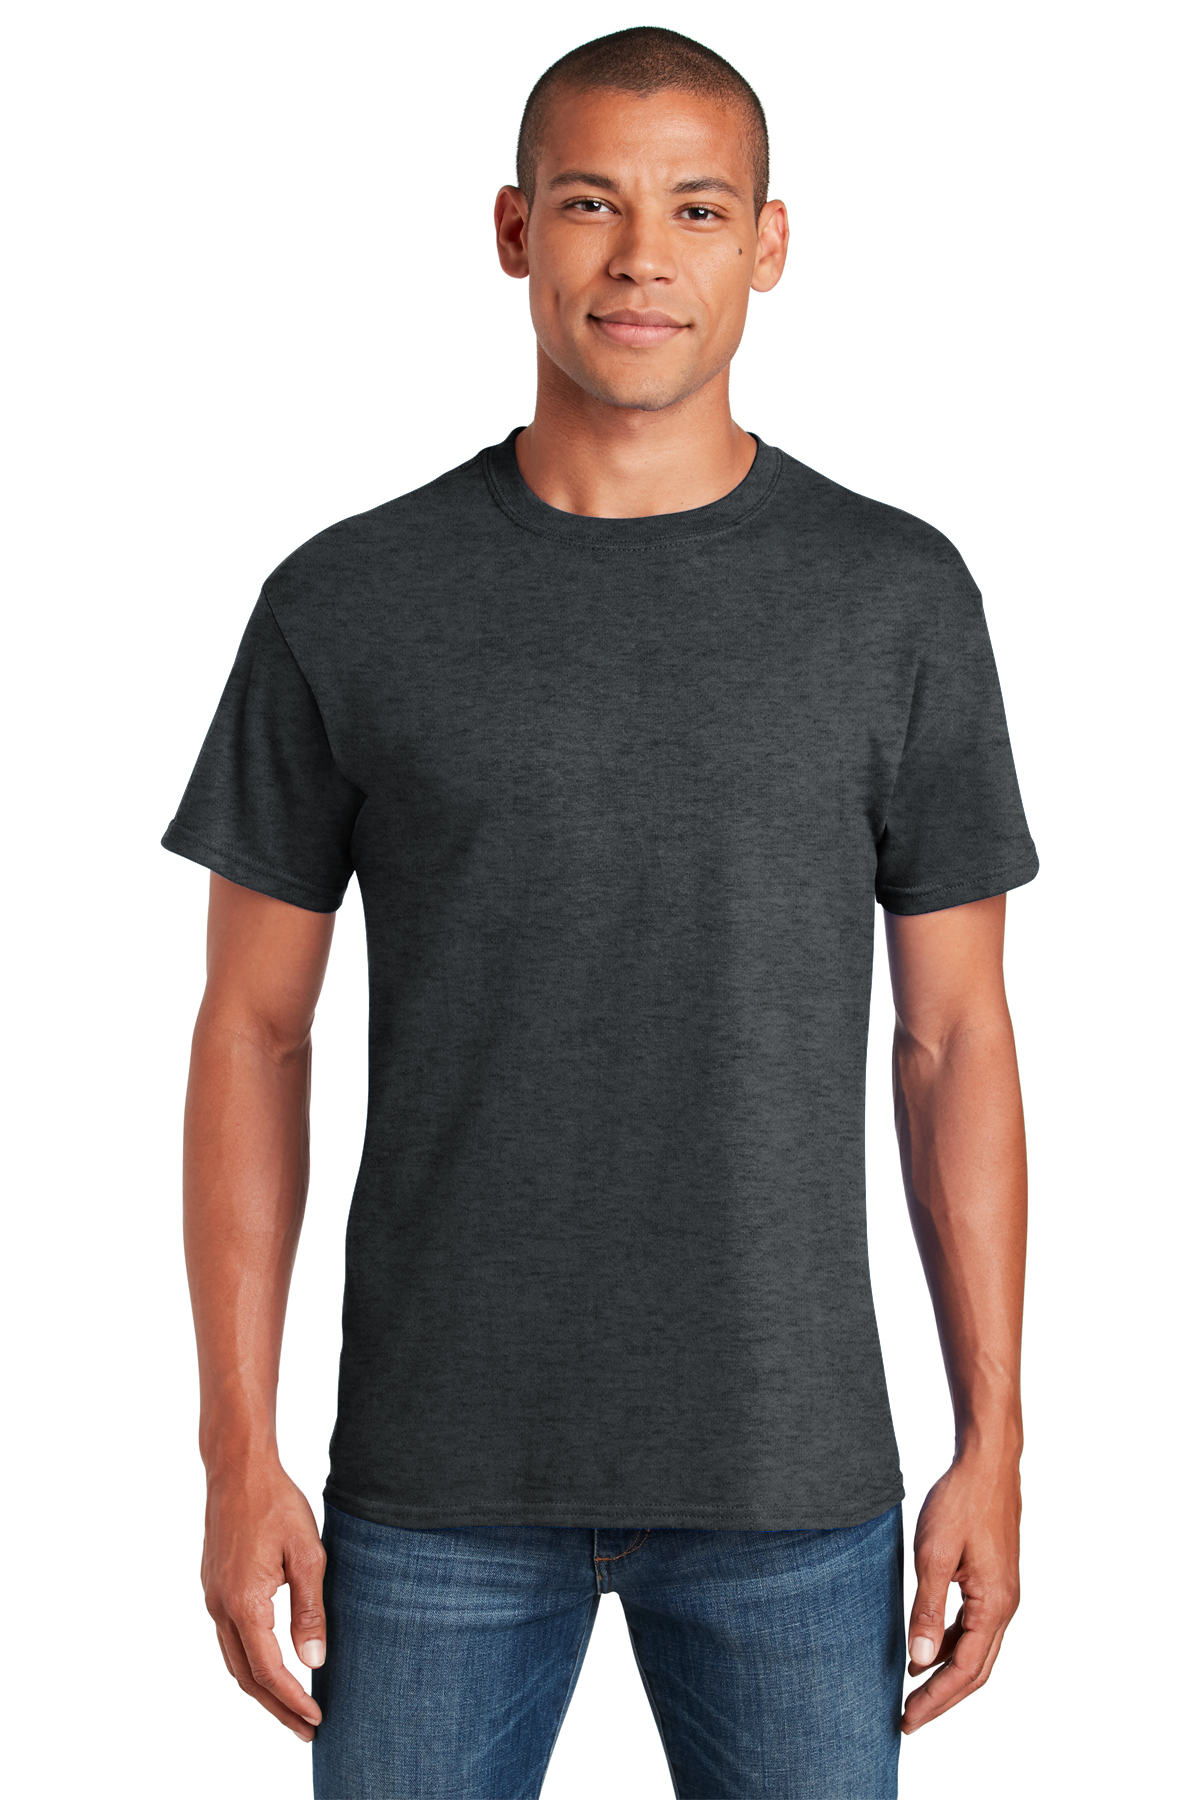 SoftStyle T-Shirt, Color: Dark Heather, Size: X-Large : :  Clothing, Shoes & Accessories